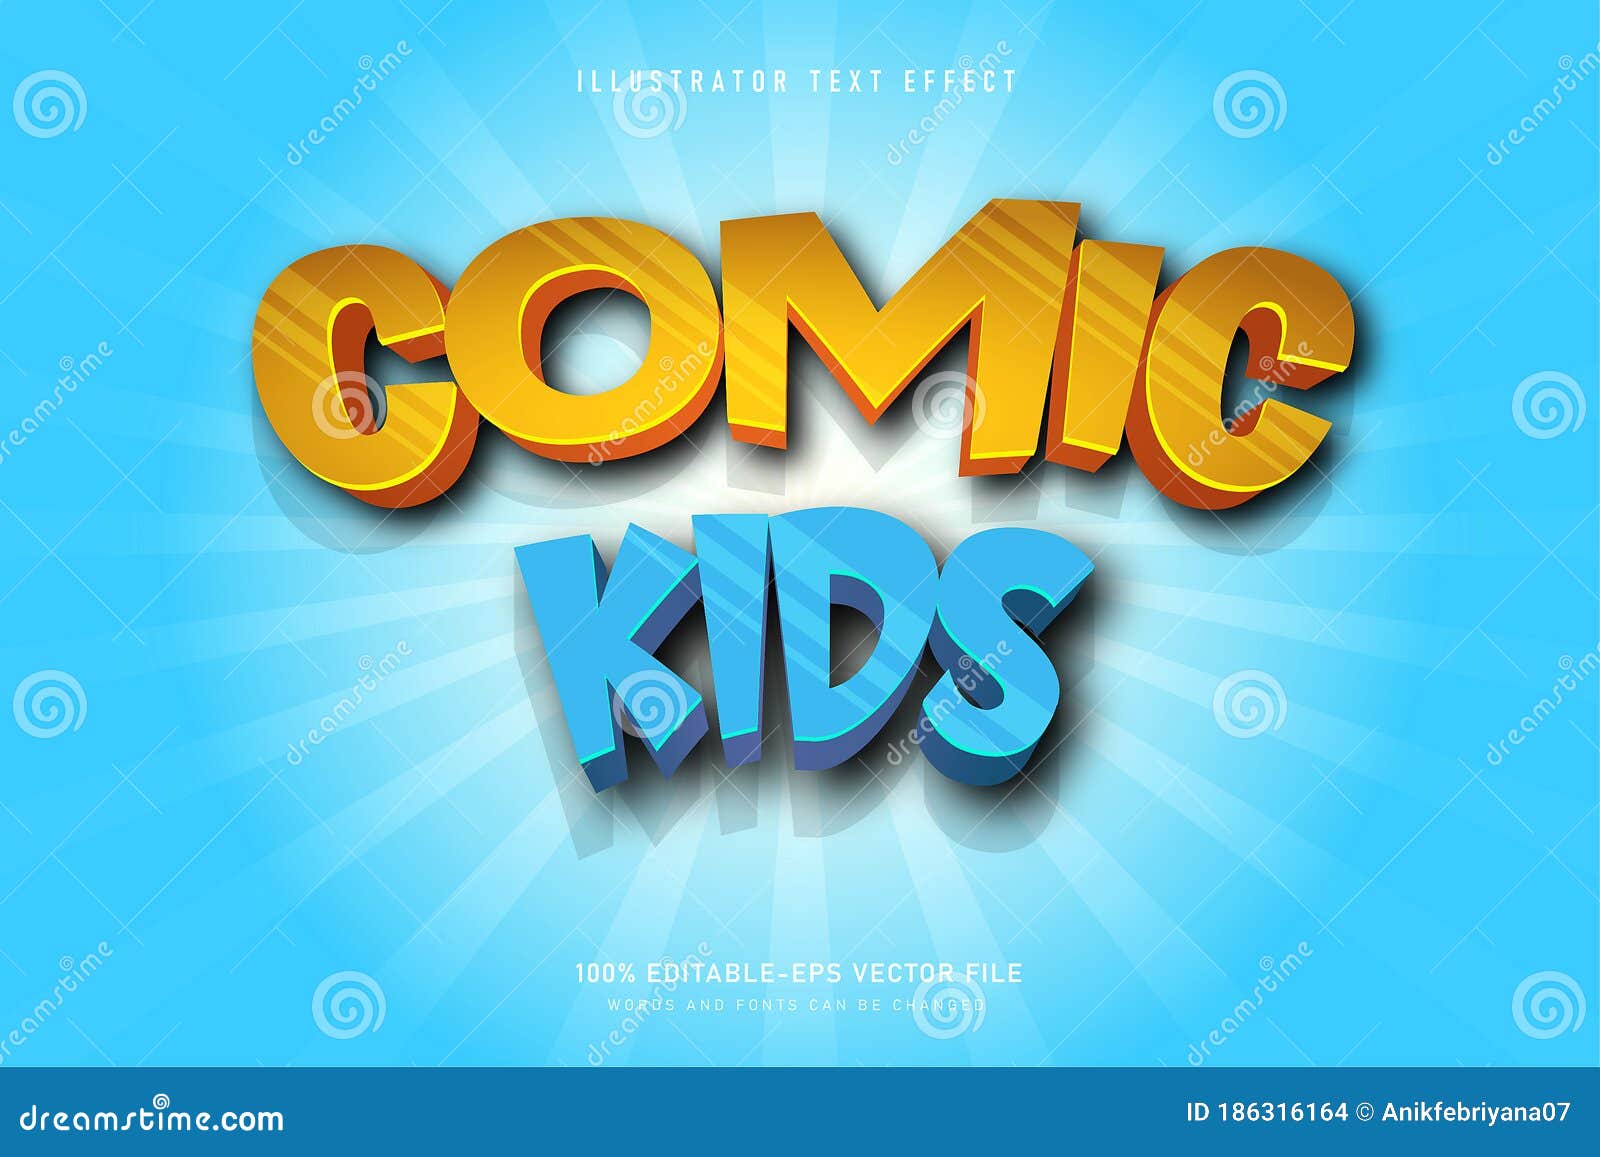 comic kids funny  text effect